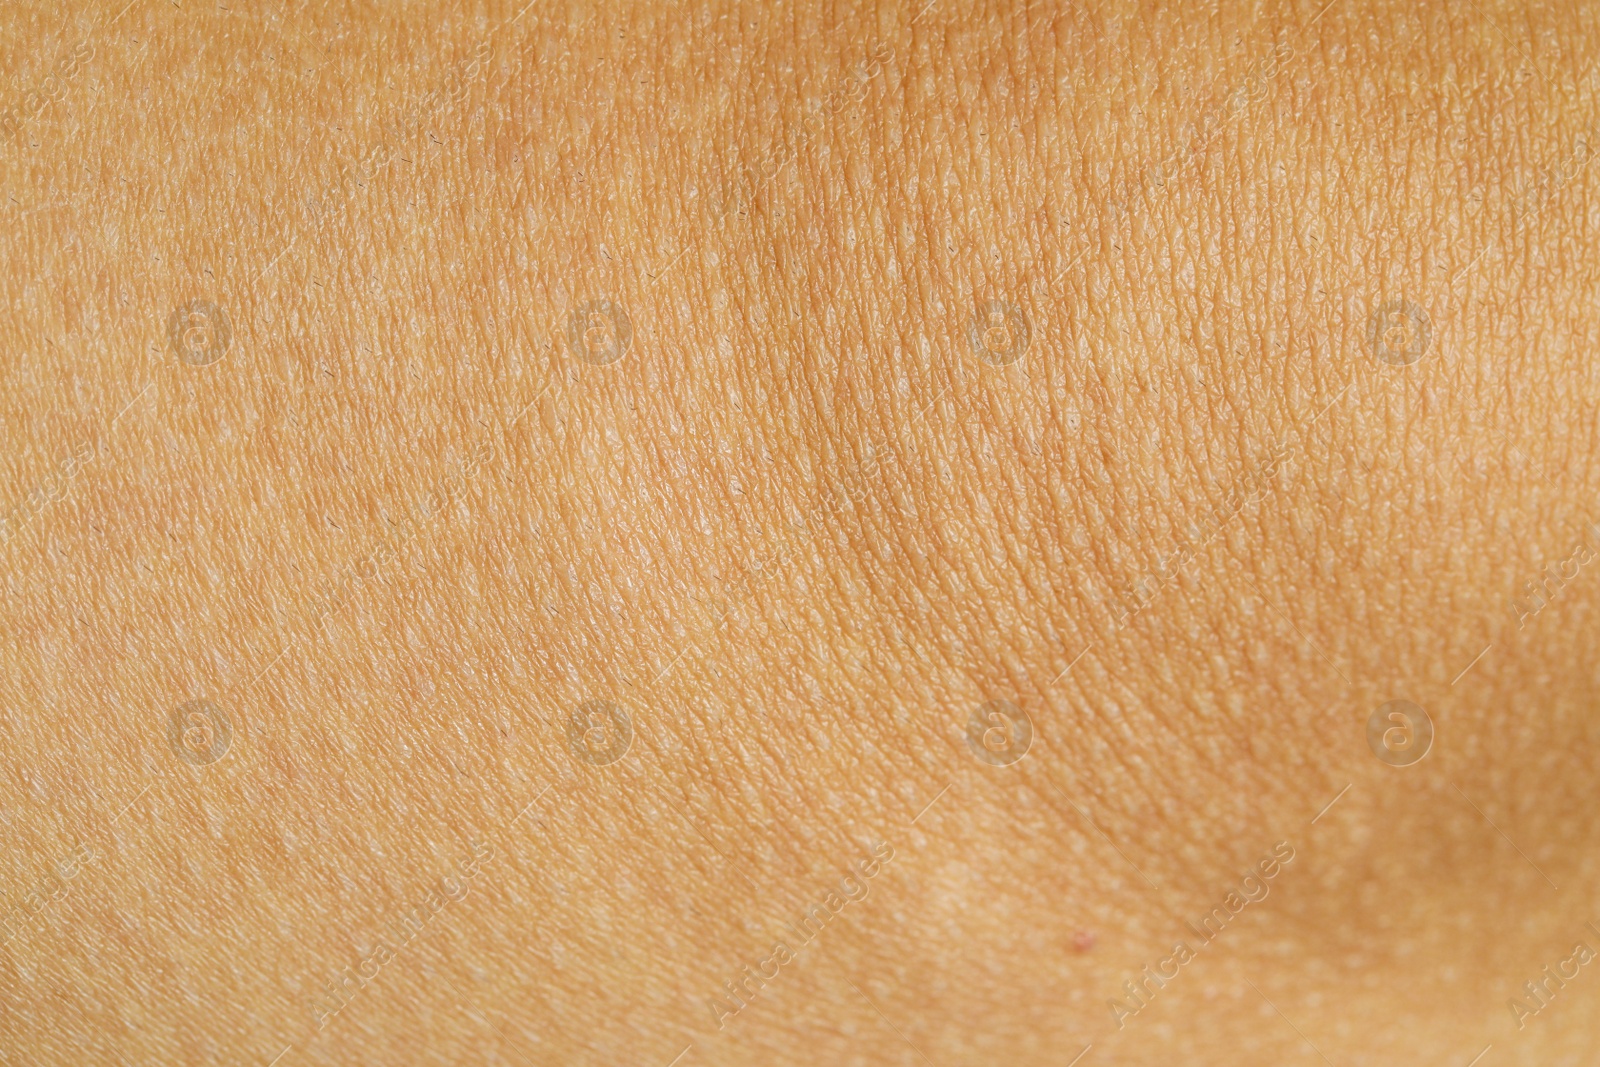 Photo of Texture of human skin as background, closeup view